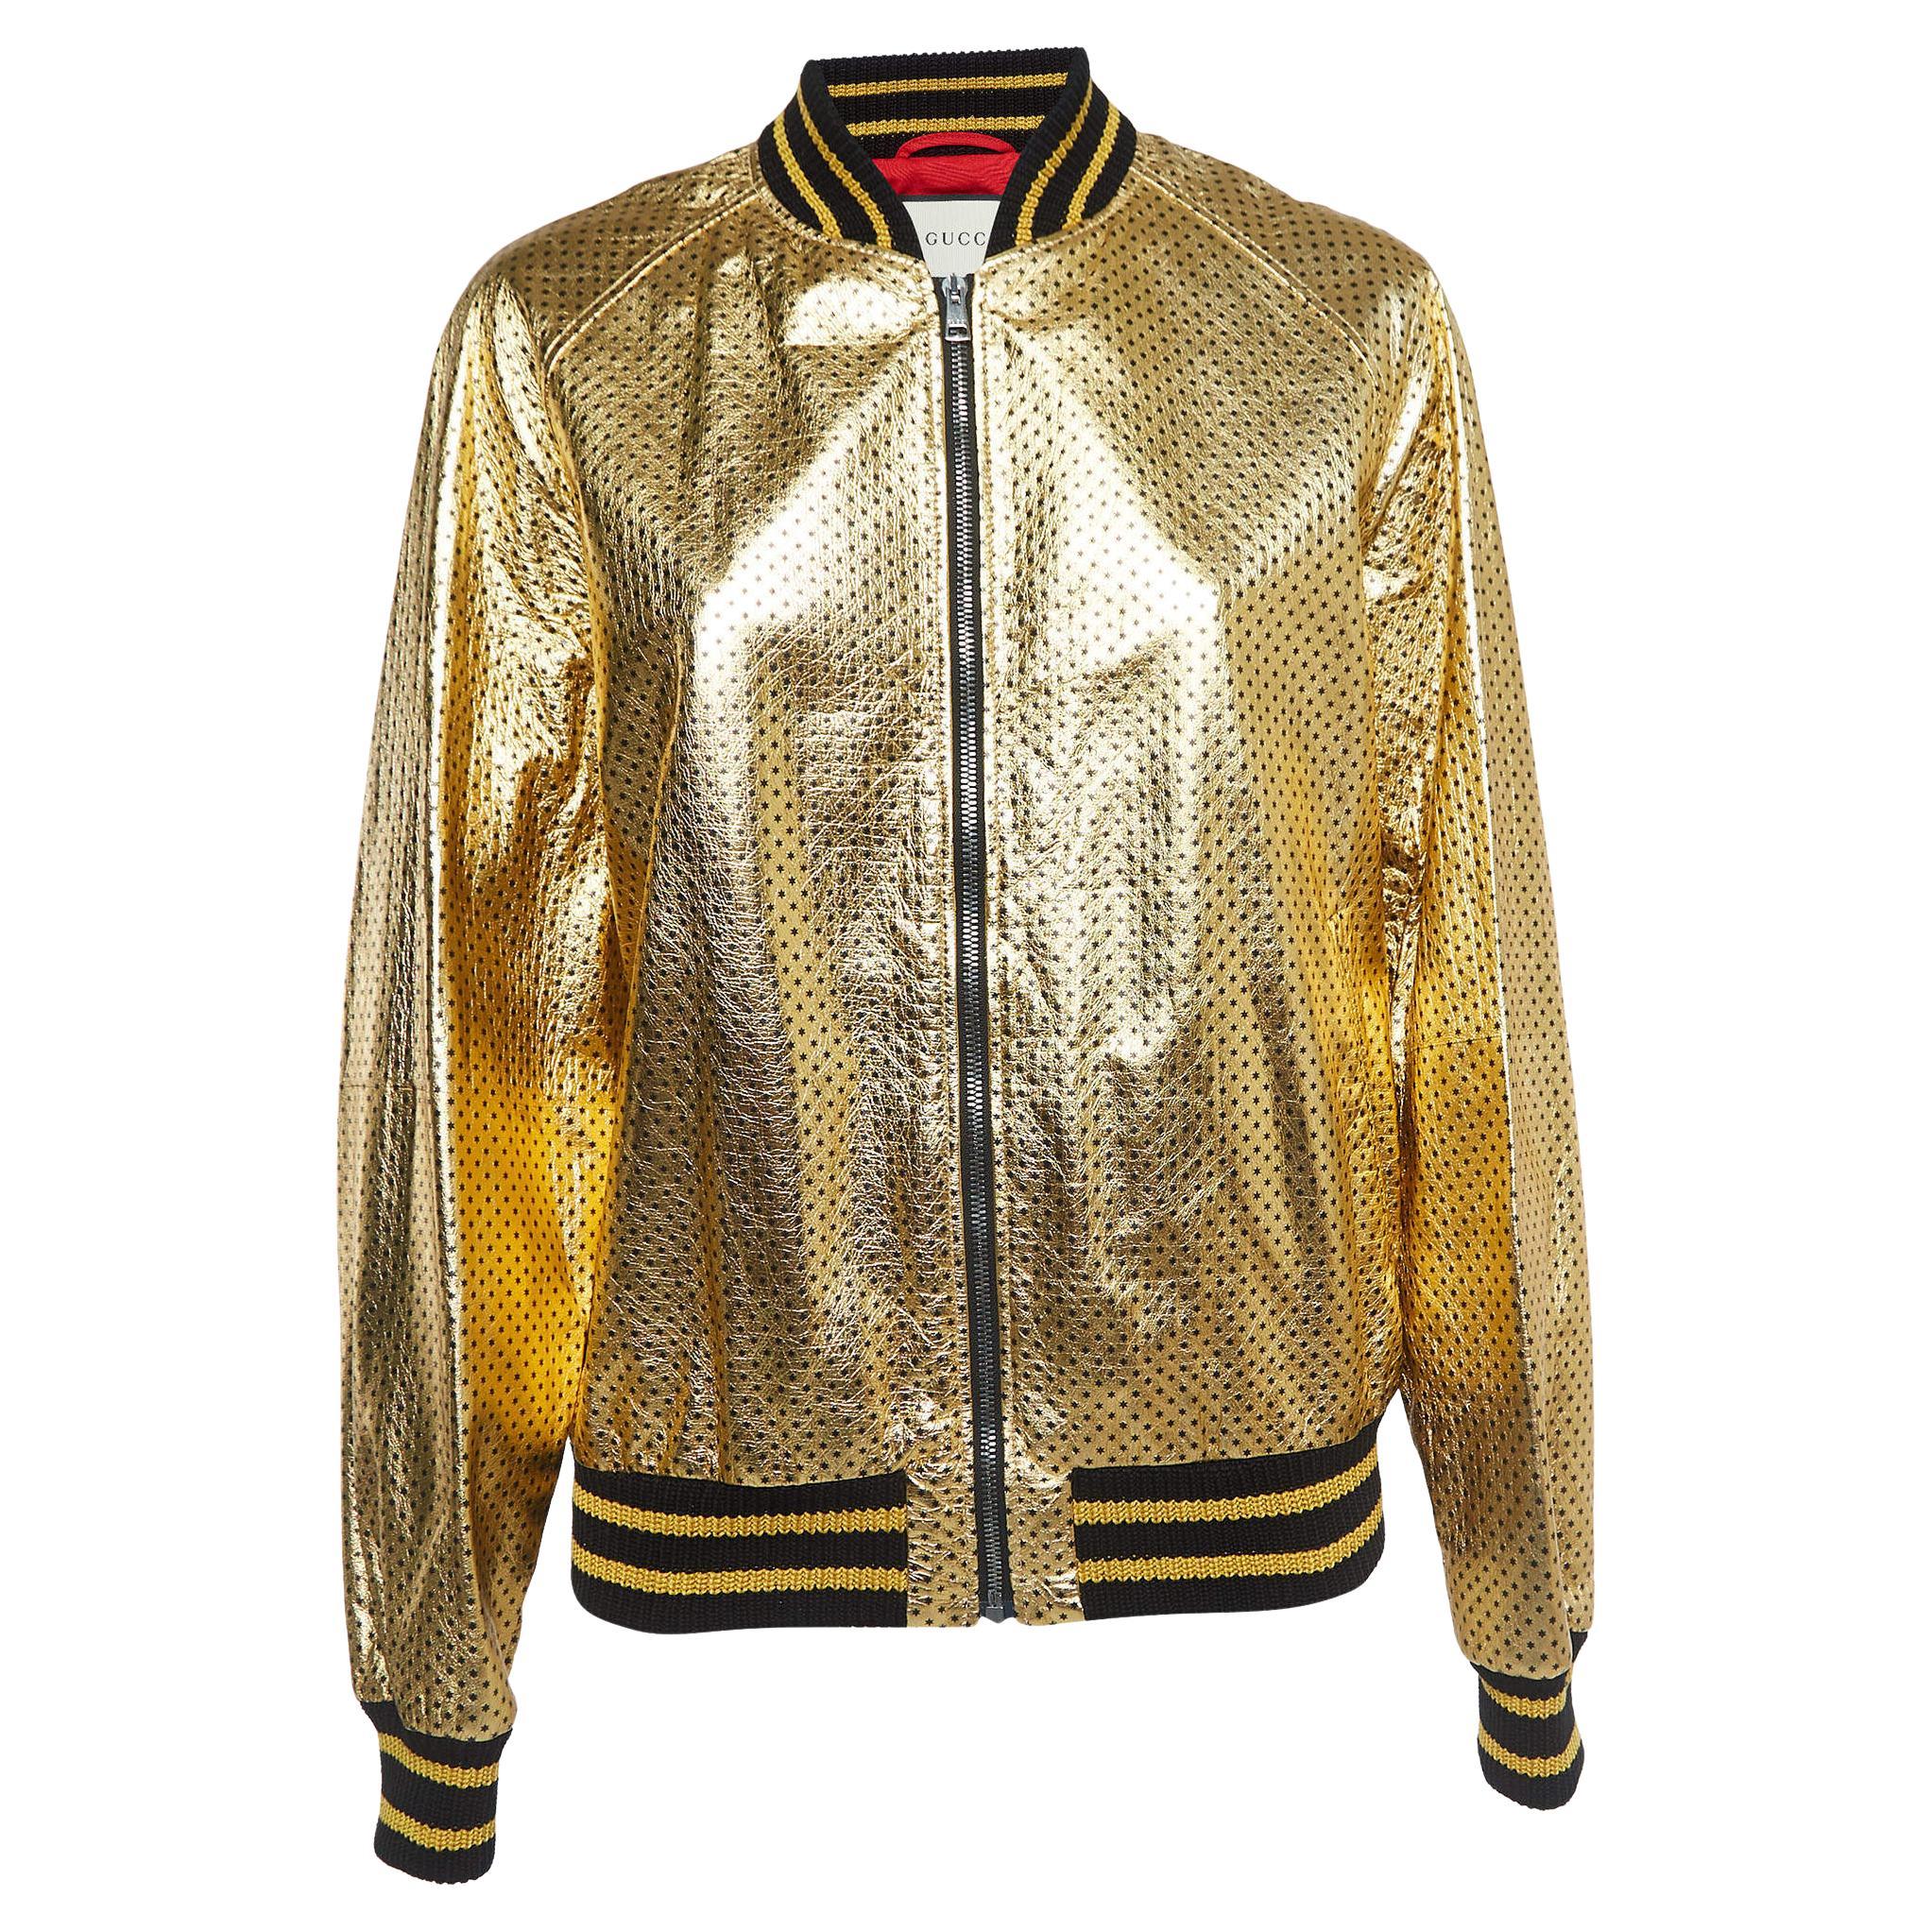 Gucci Gold Metallic Star Print Crinkled Leather Bomber Jacket XS For Sale